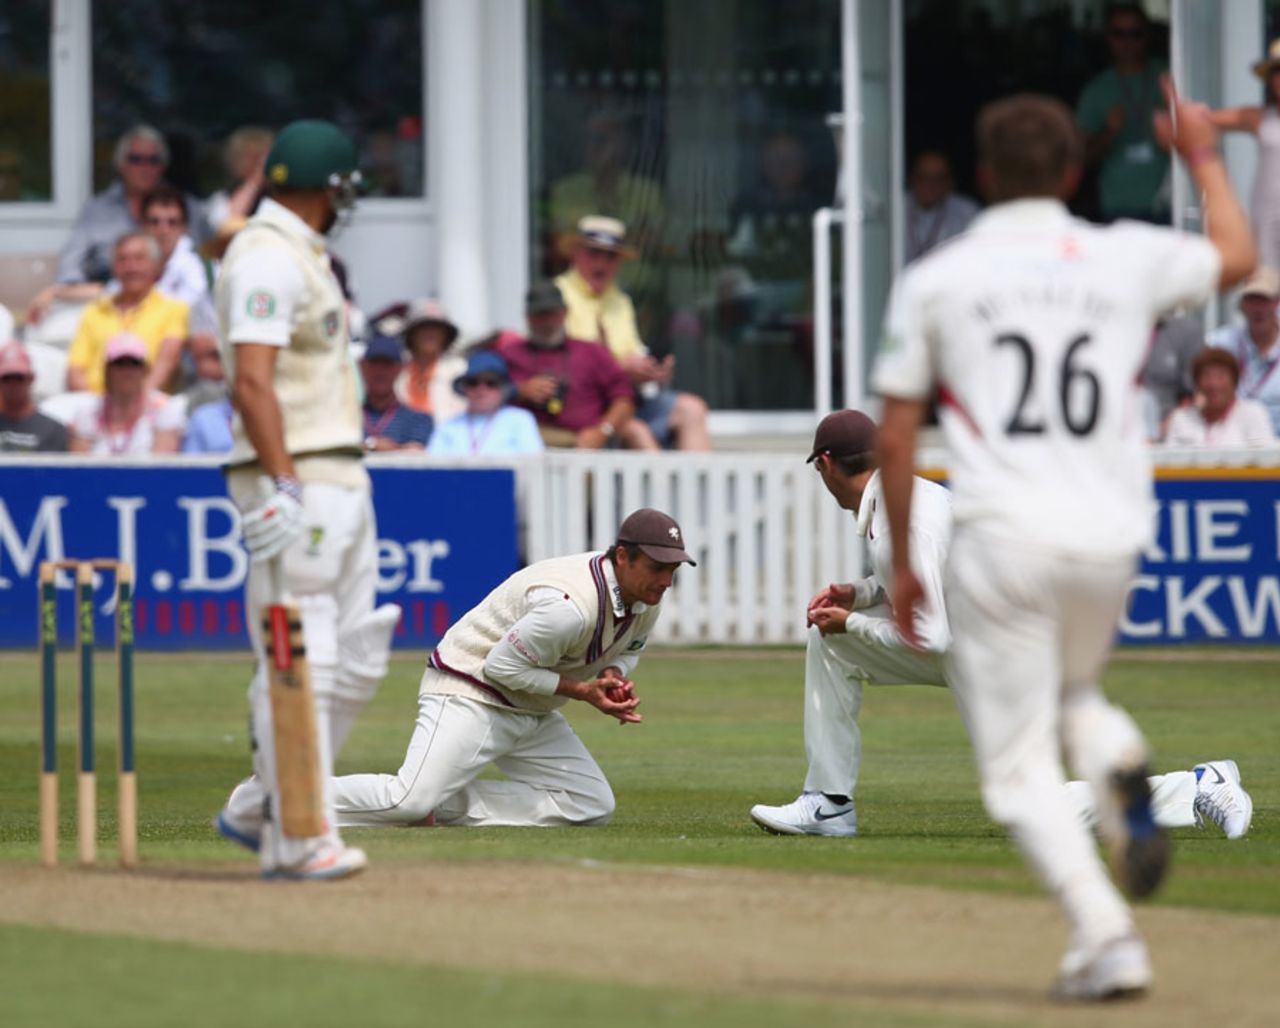 Usman Khawaja watches as James Hildreth catches his edge, Somerset v Australians, Taunton, 2nd day, June 27, 2013